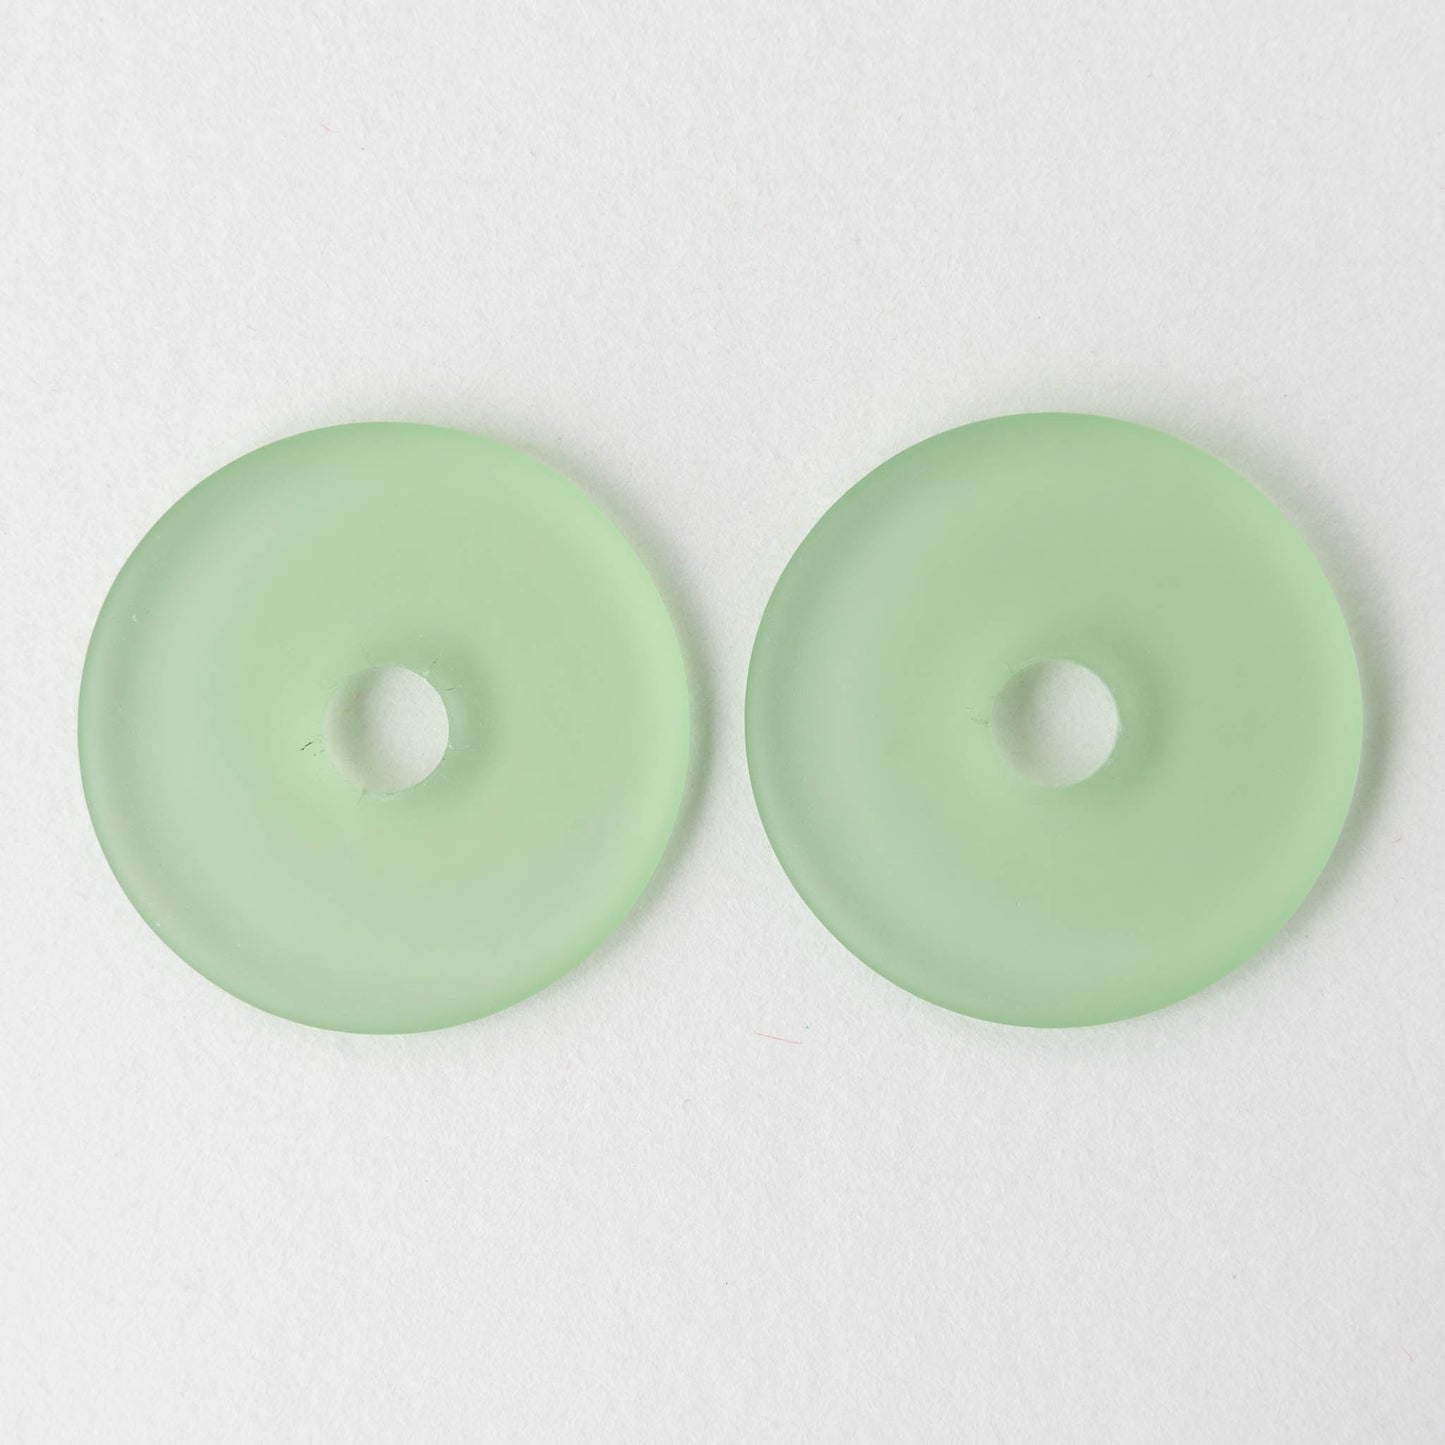 34mm Frosted Glass Donut - Peridot Green - 1 Donut